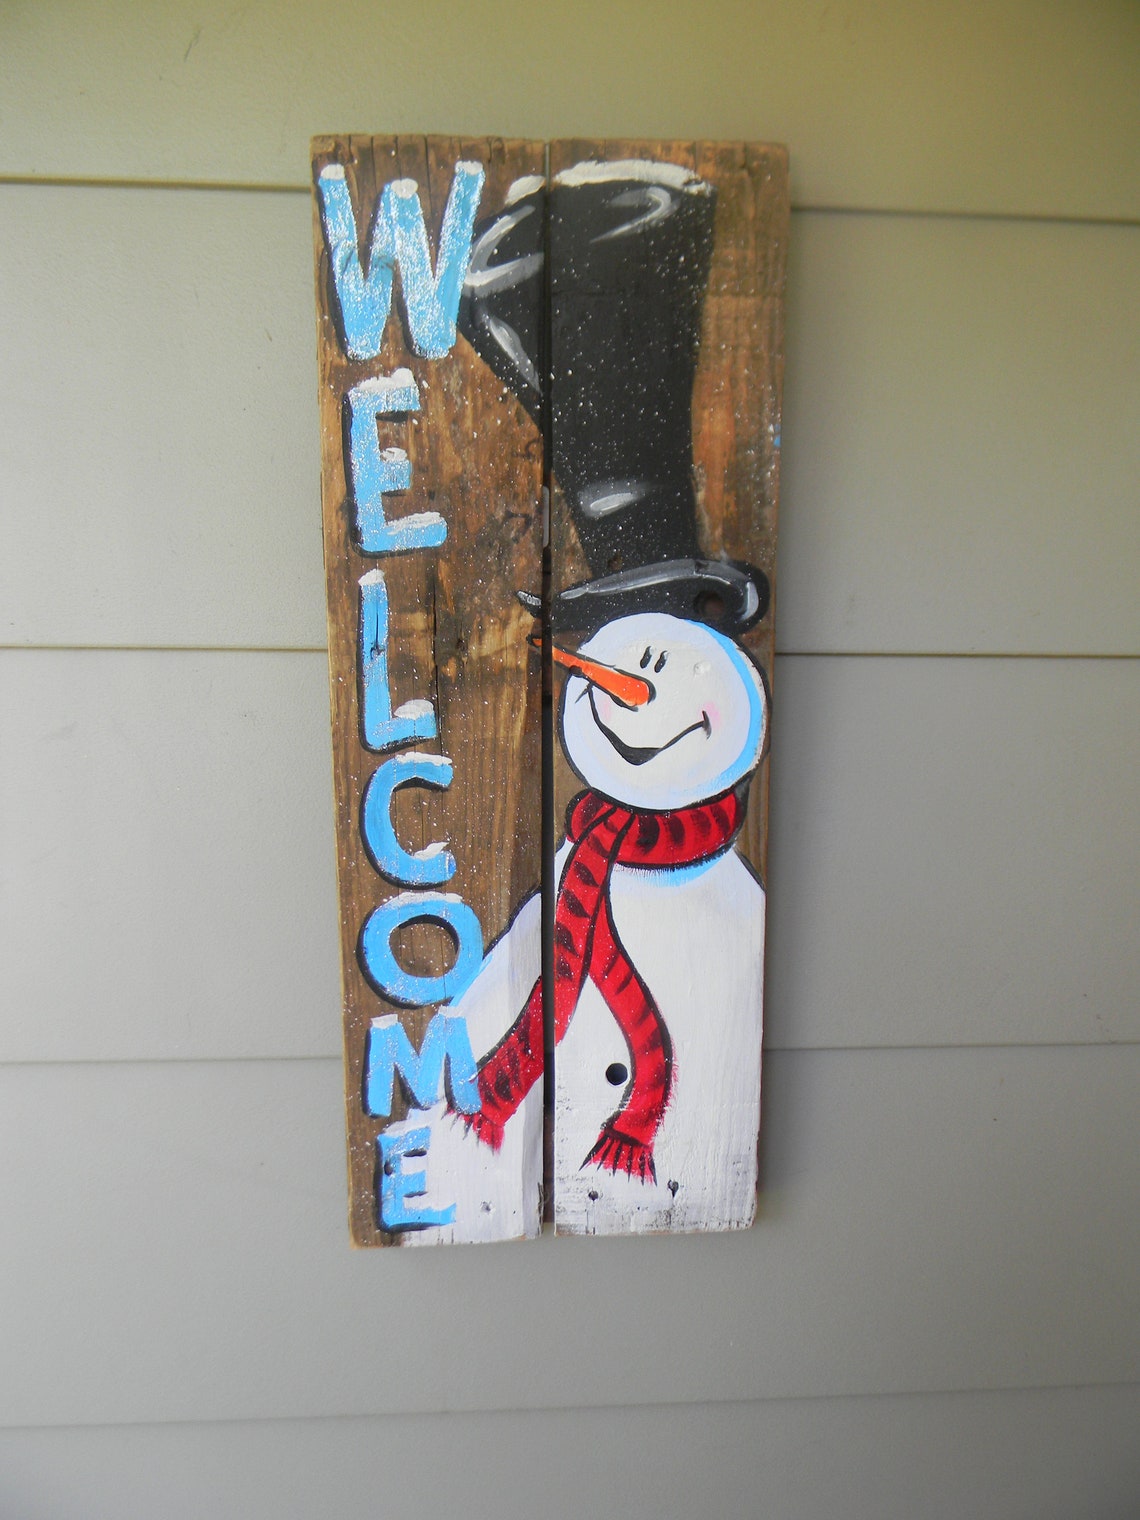 Snowman welcome wood sign hand painted front porch decor | Etsy